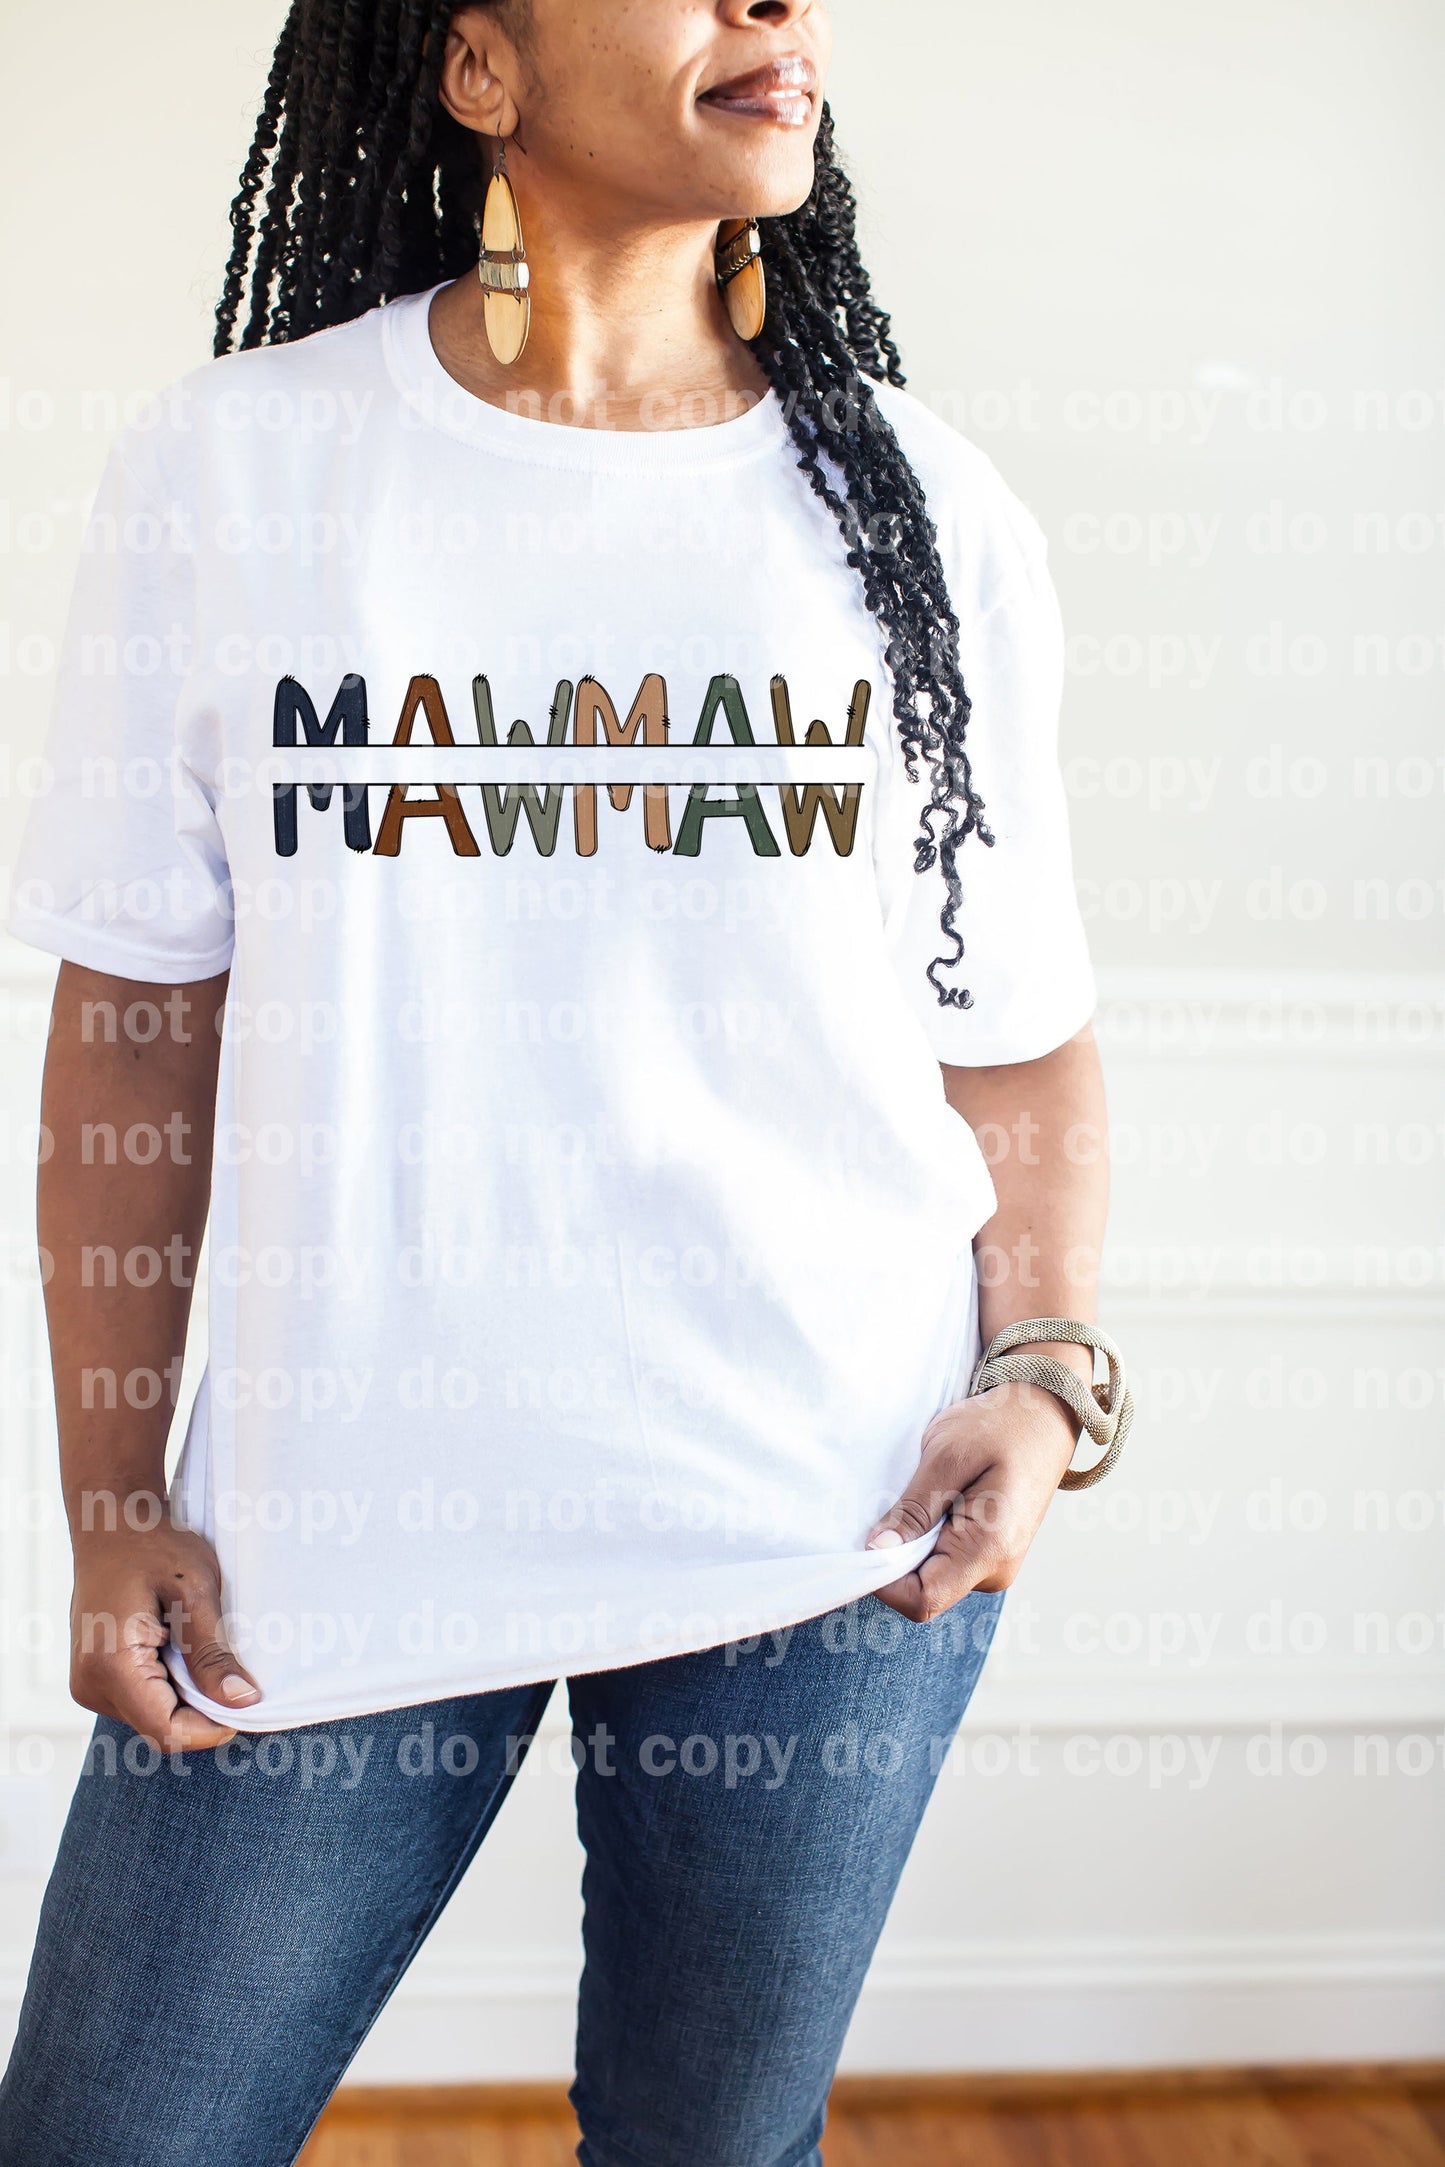 Mawmaw Customizable Dream Print or Sublimation Print